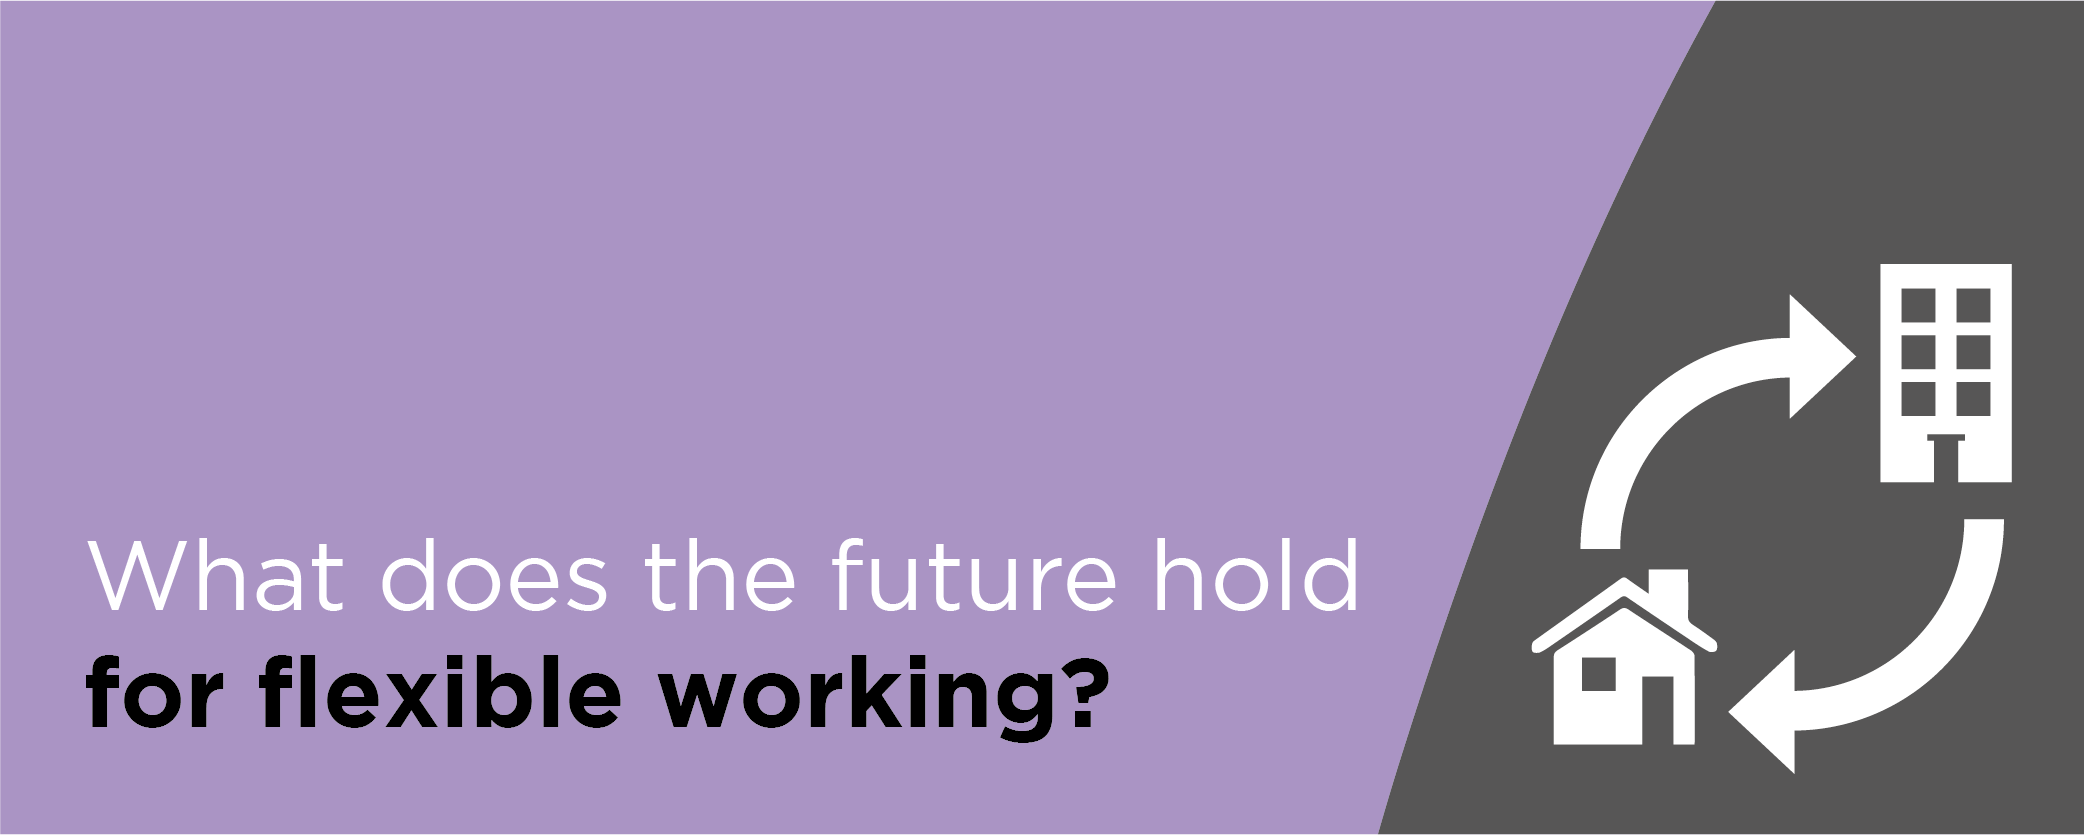 What does the future hold for flexible working?